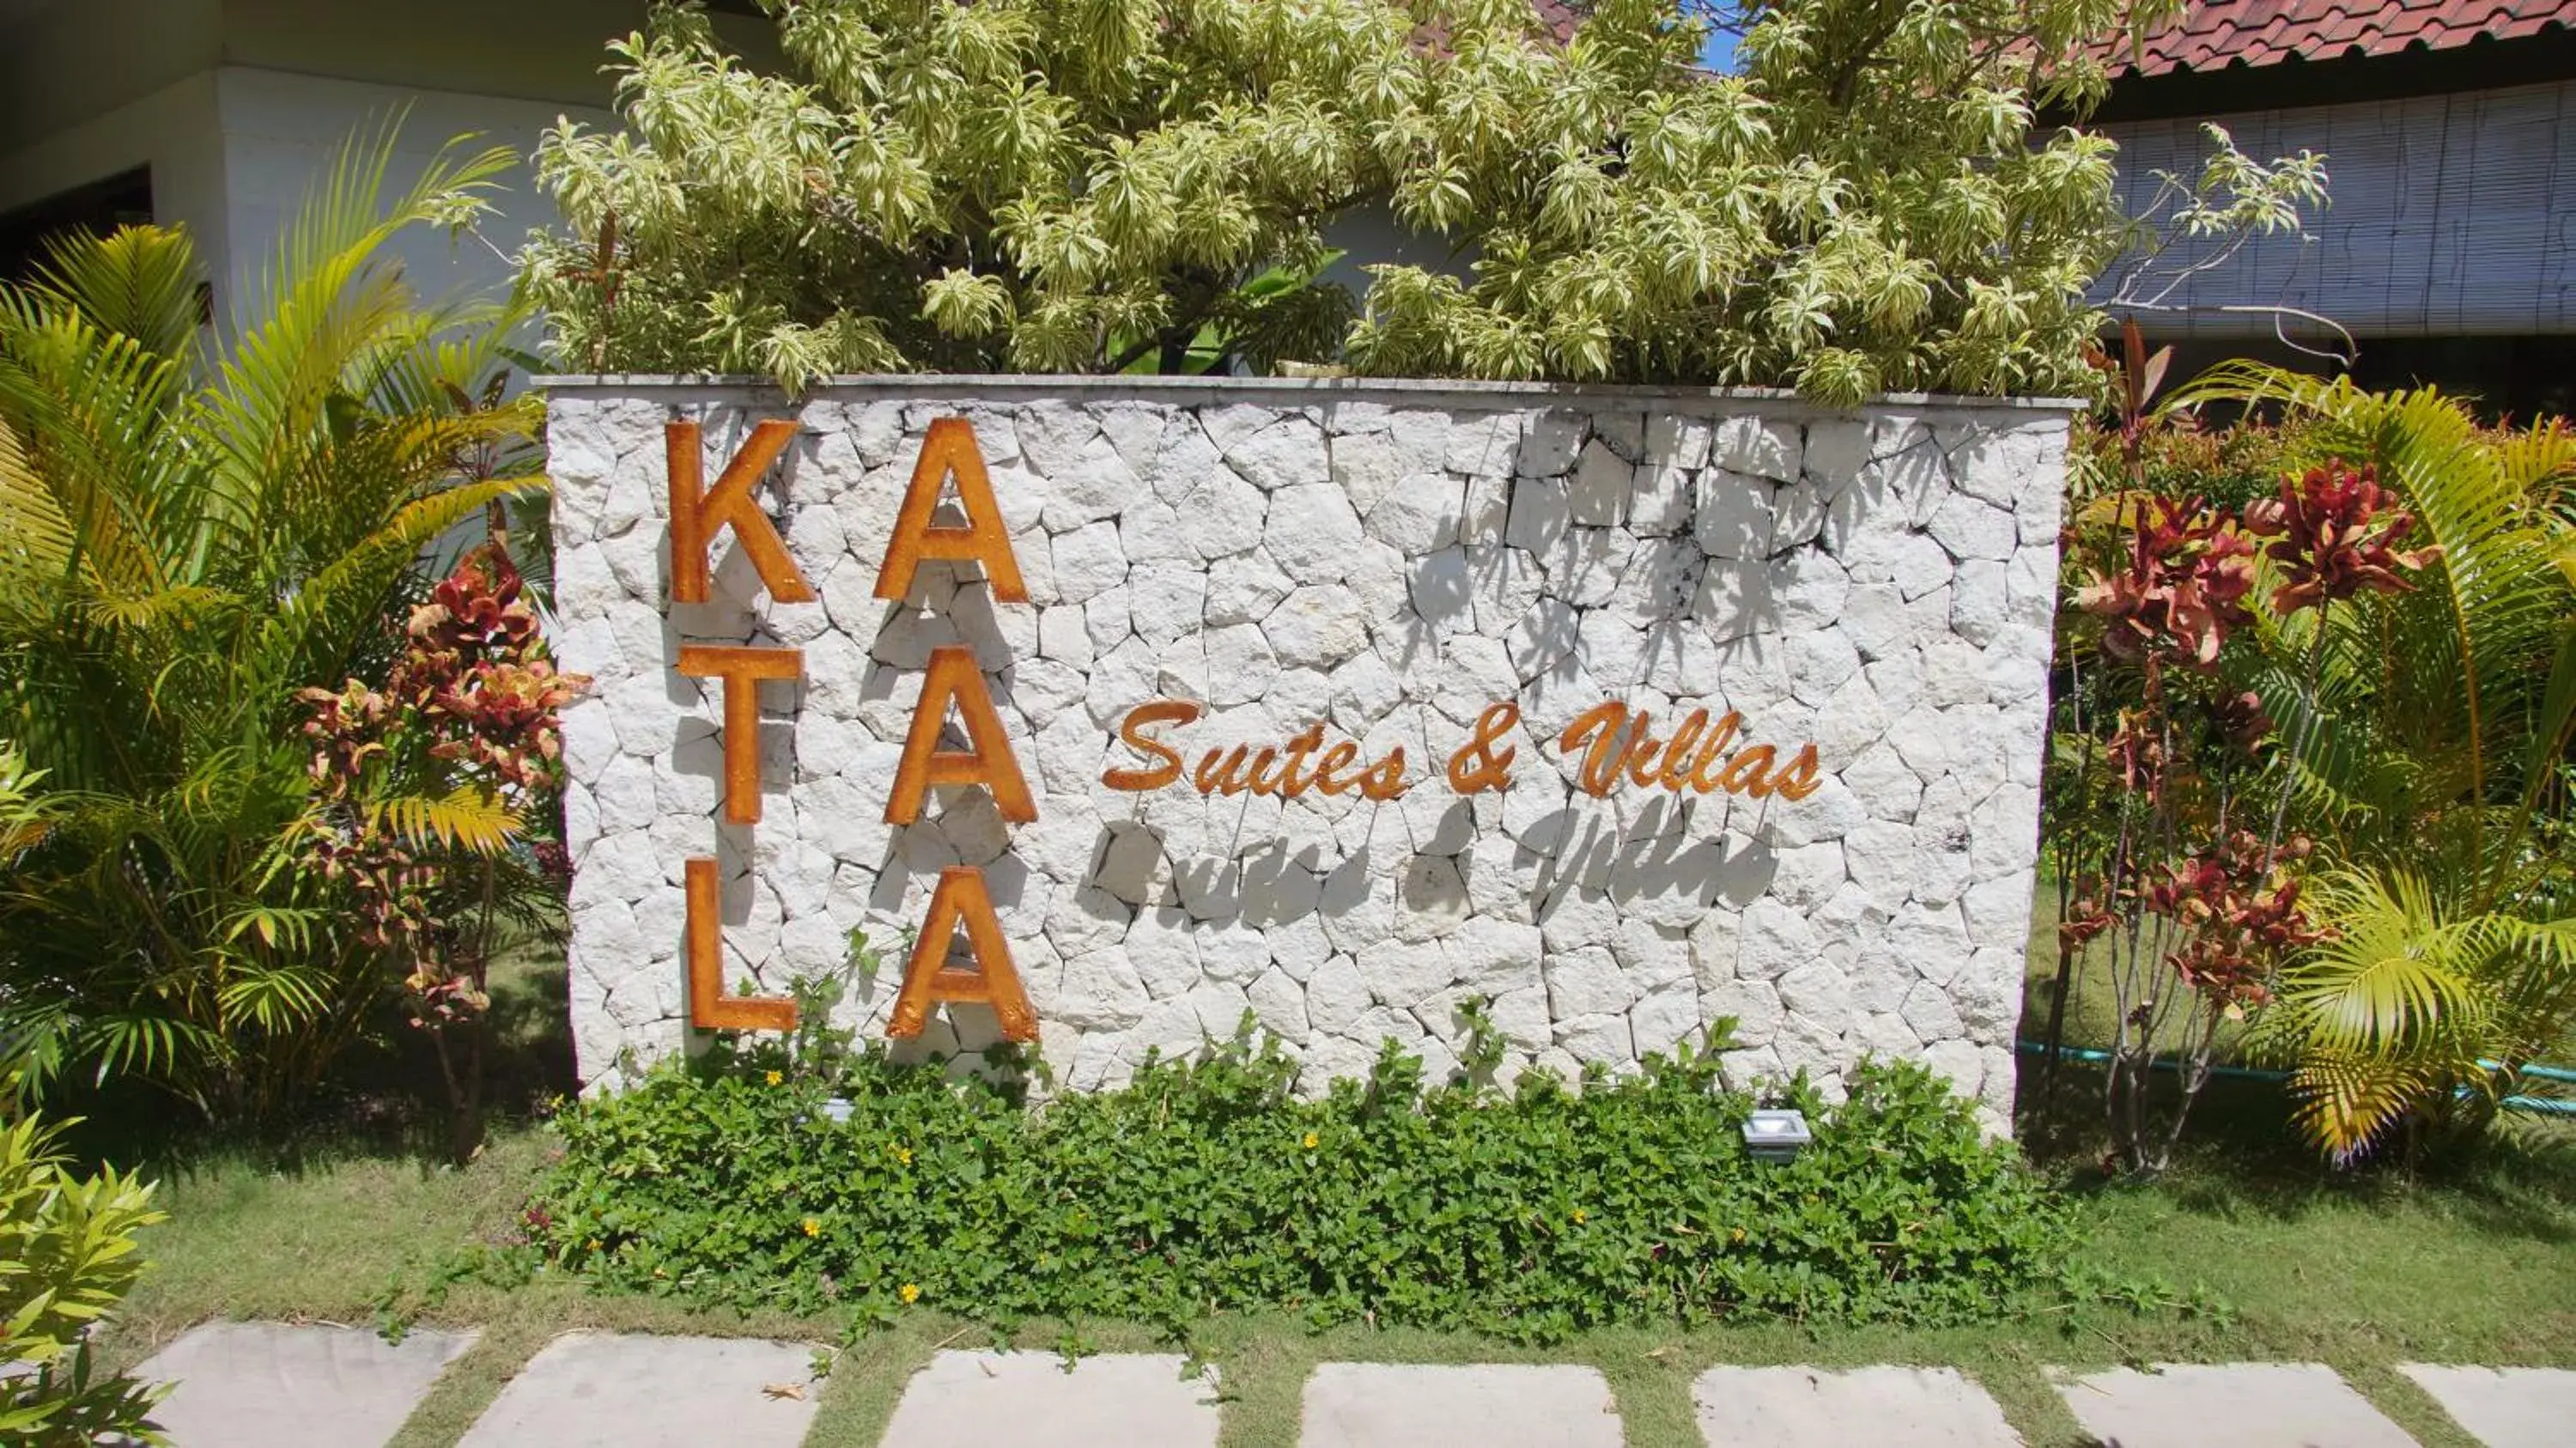 Property logo or sign in Katala Suites and Villas